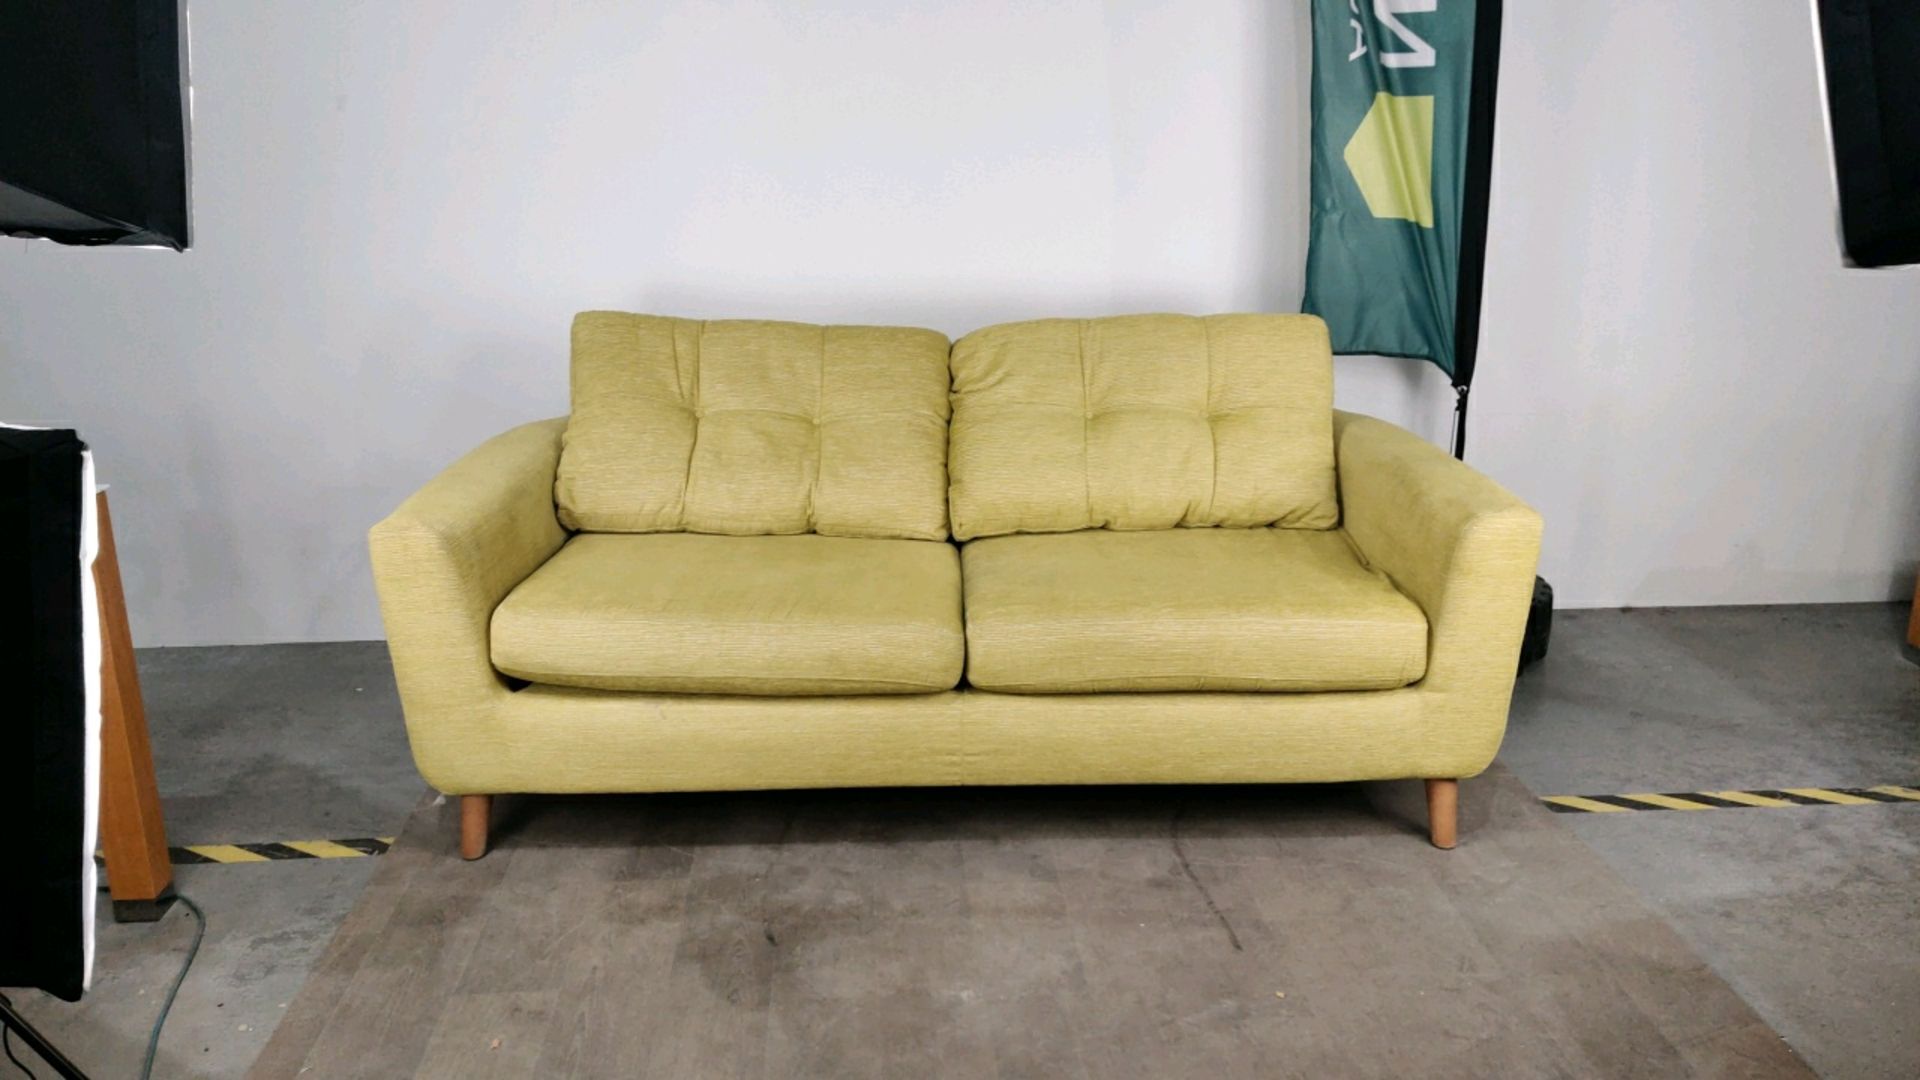 Two Seater Green Sofa - Image 2 of 2